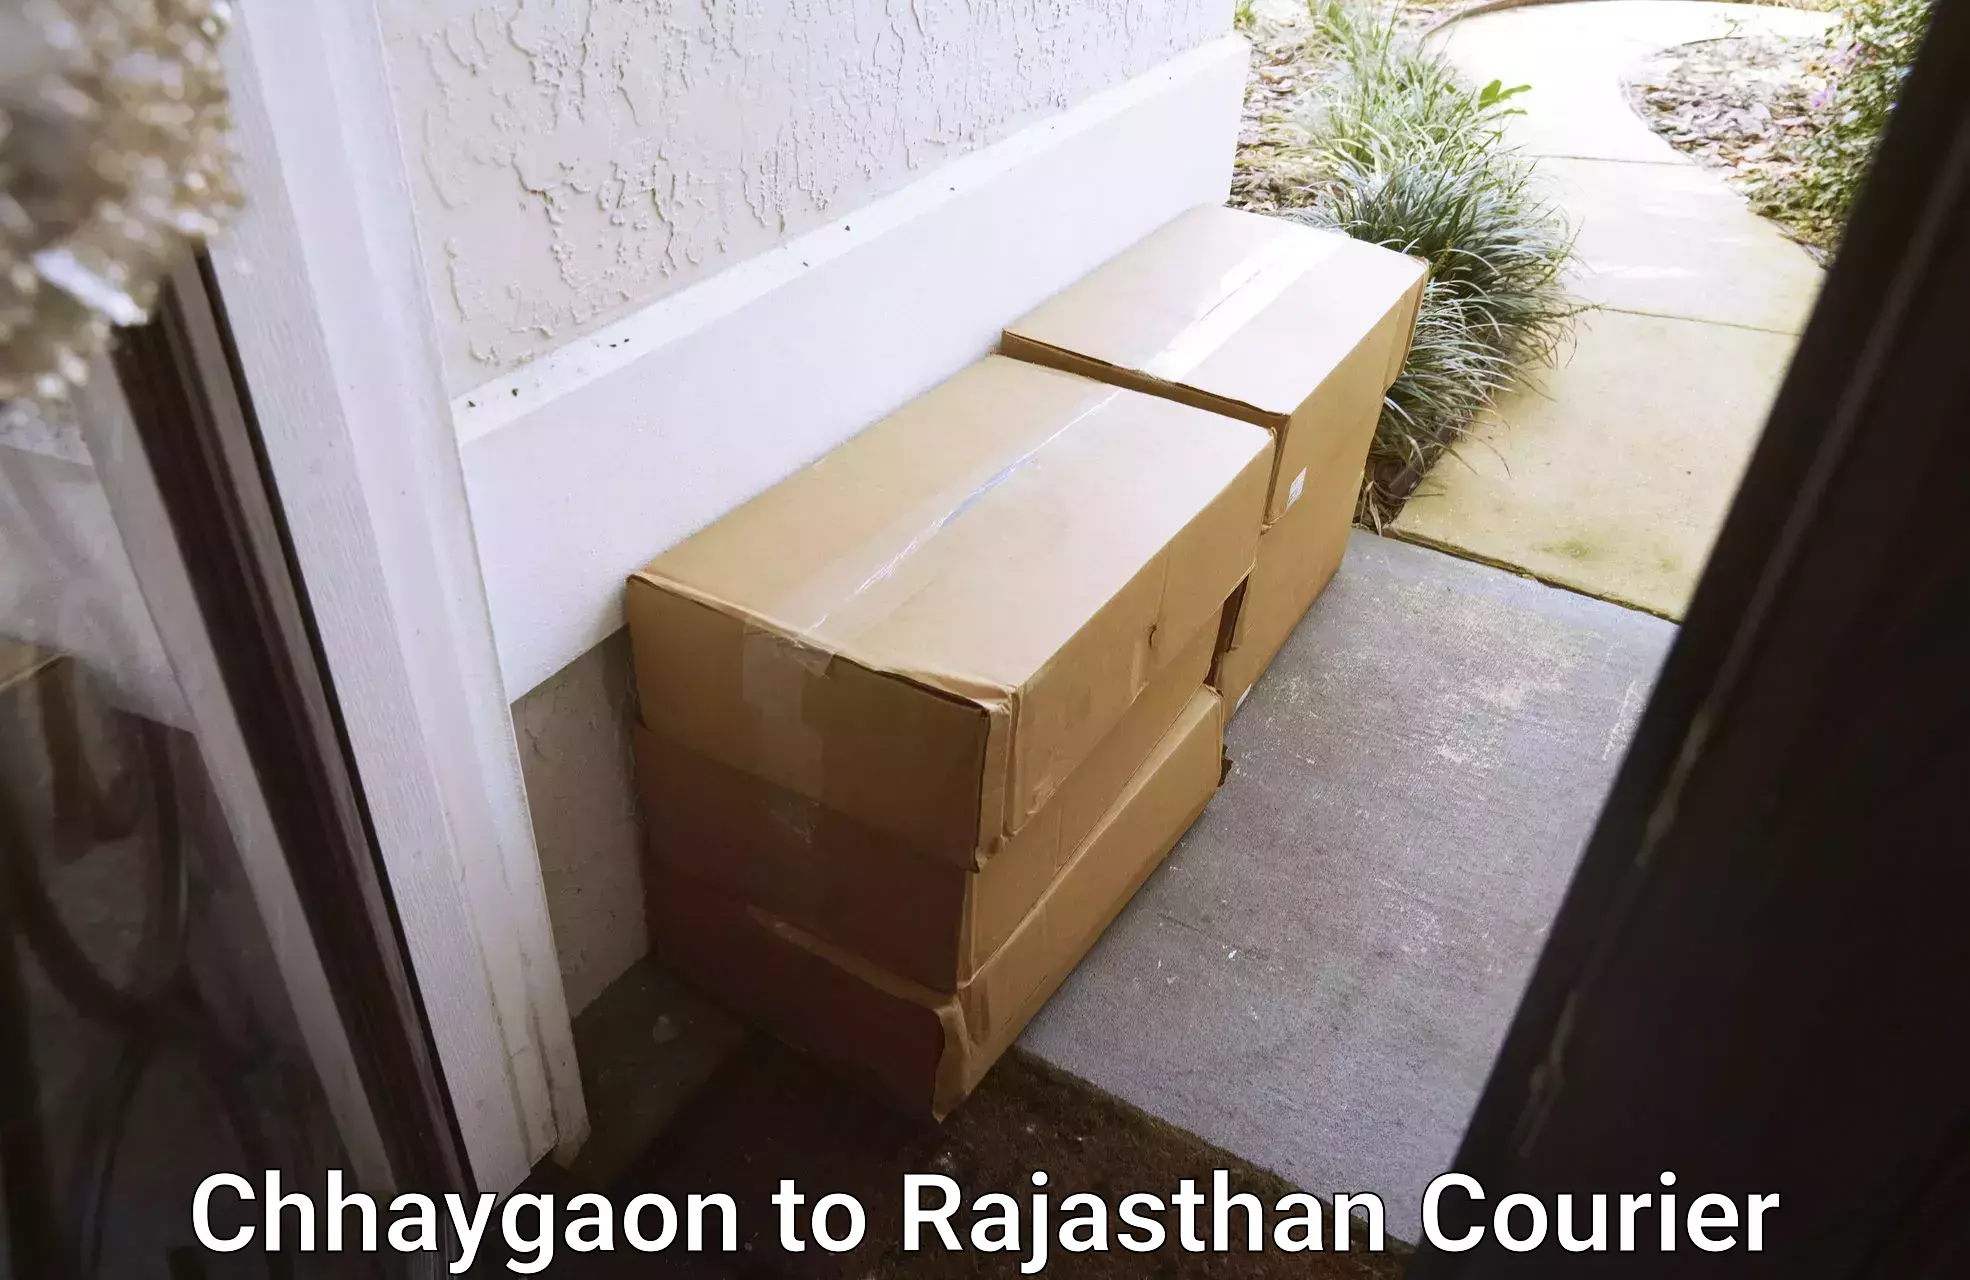 Multi-city courier Chhaygaon to Tibbi